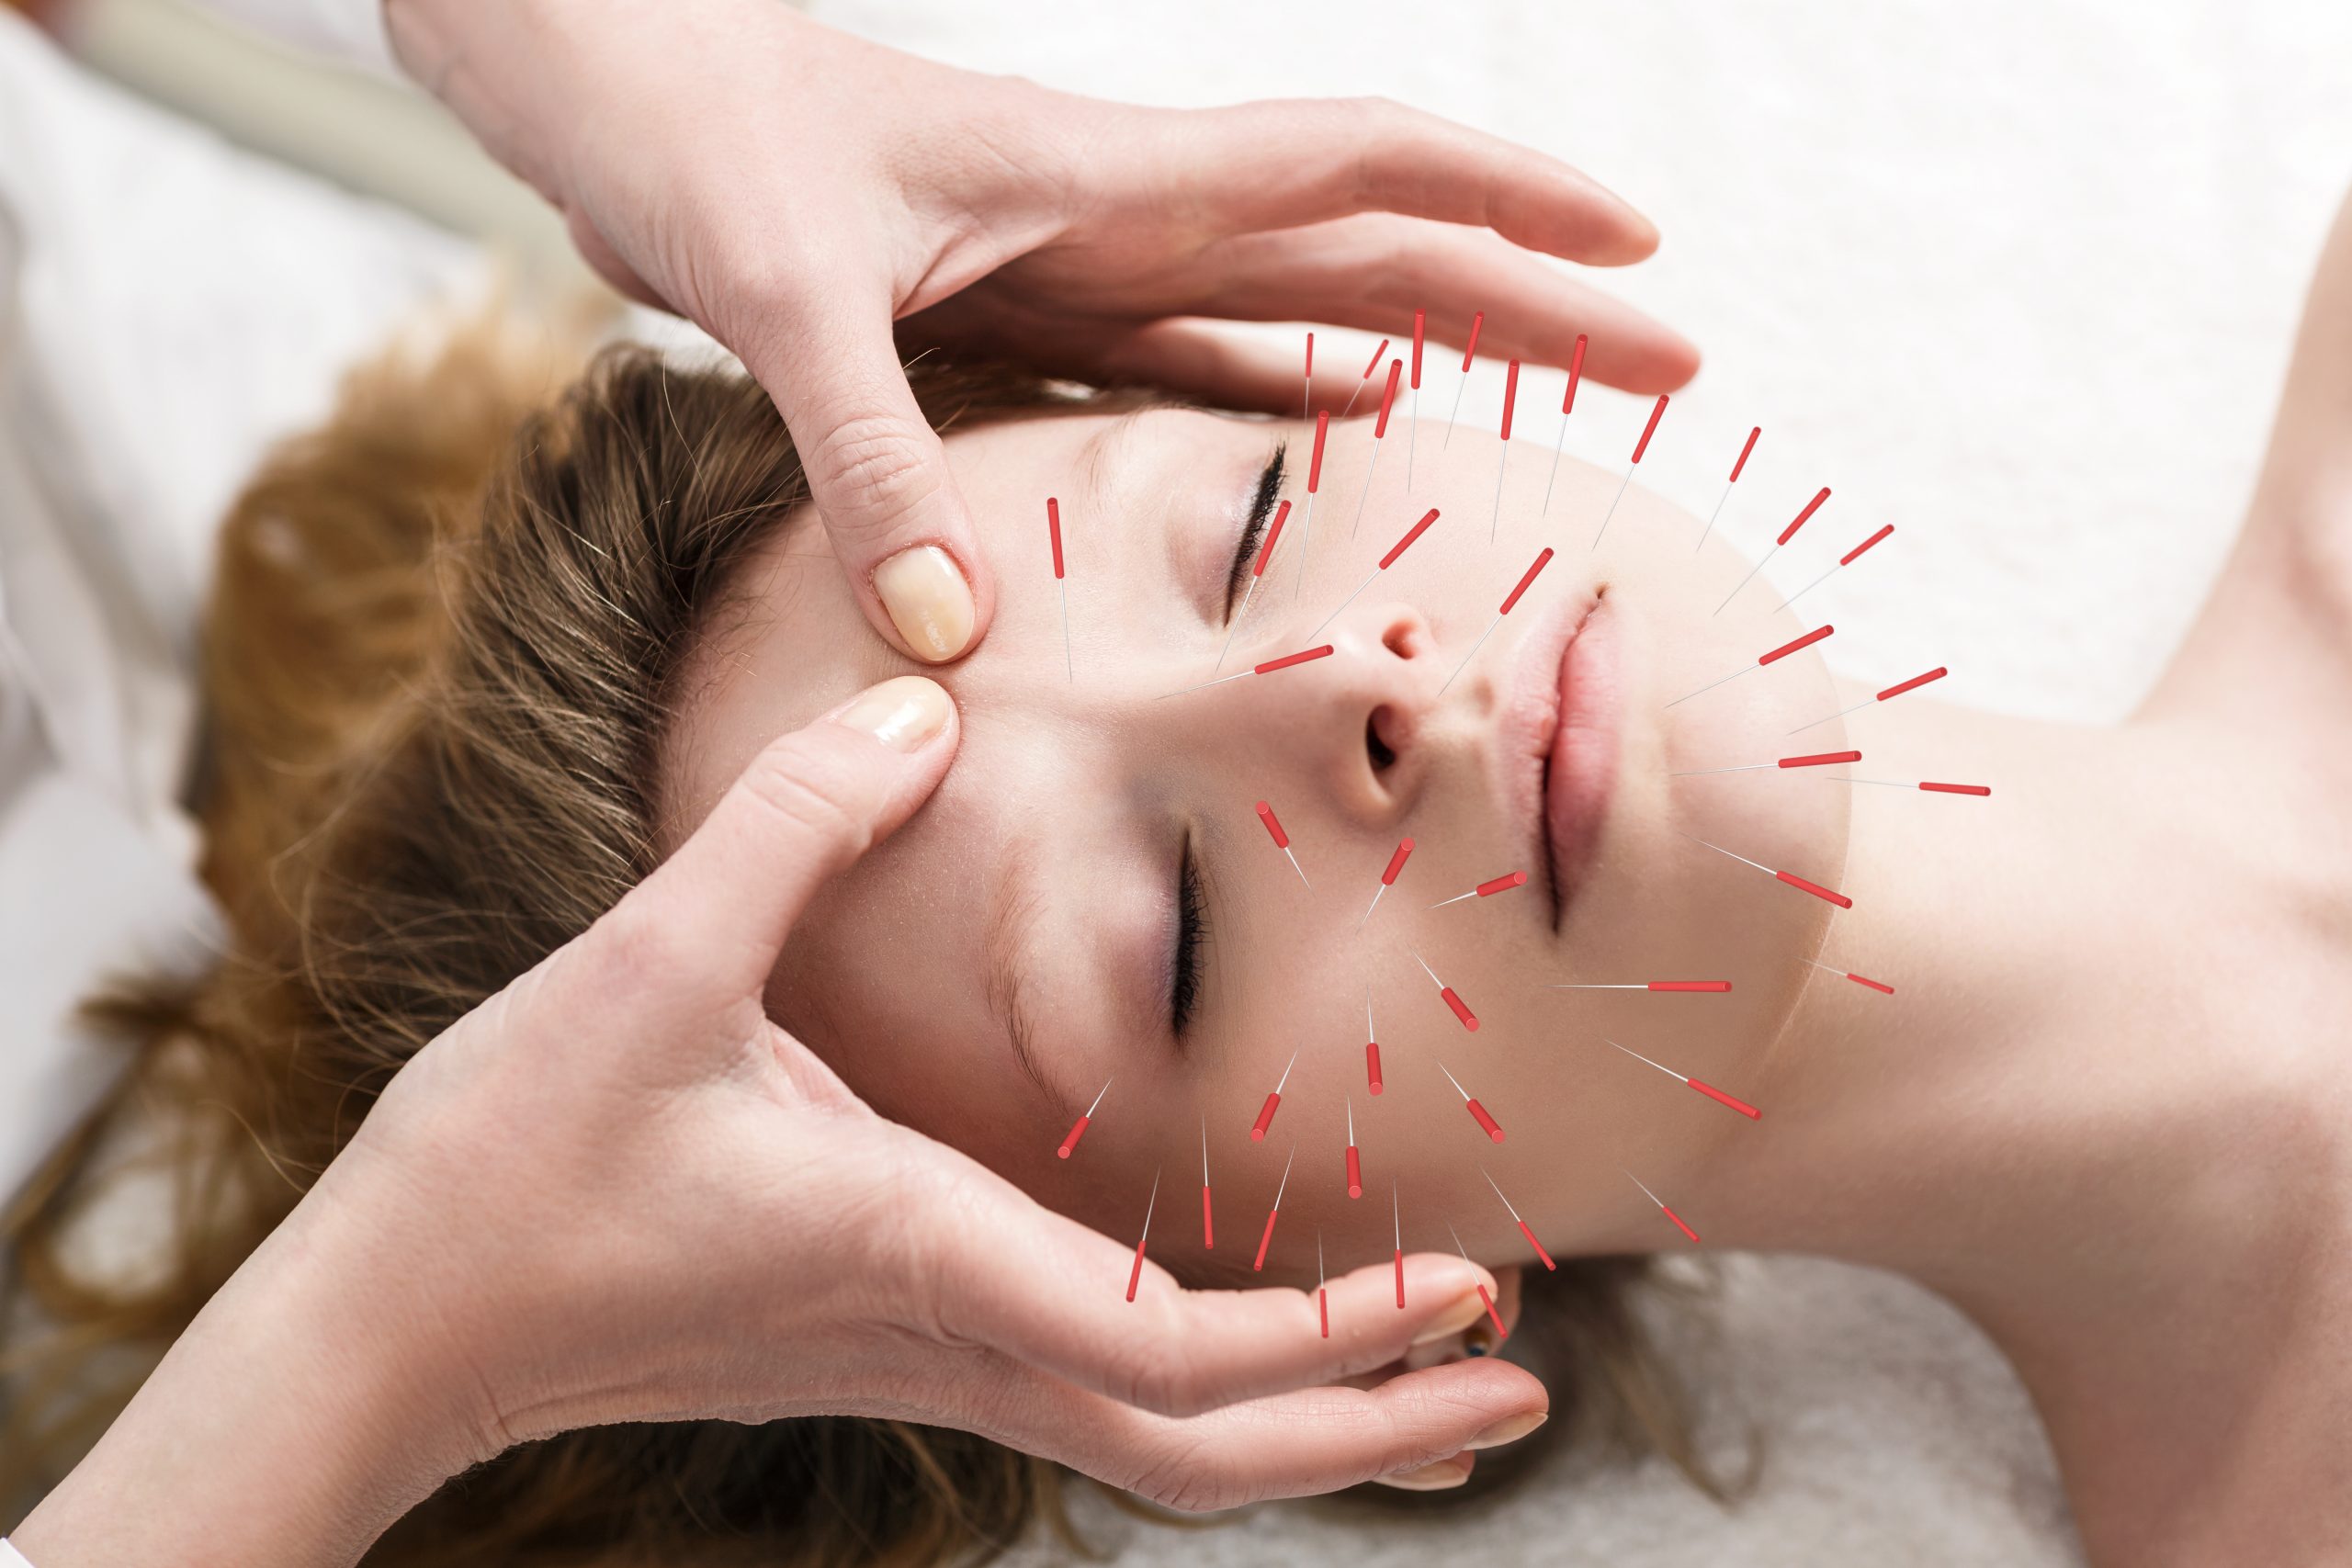 acupuncture as alternative treatment to pain